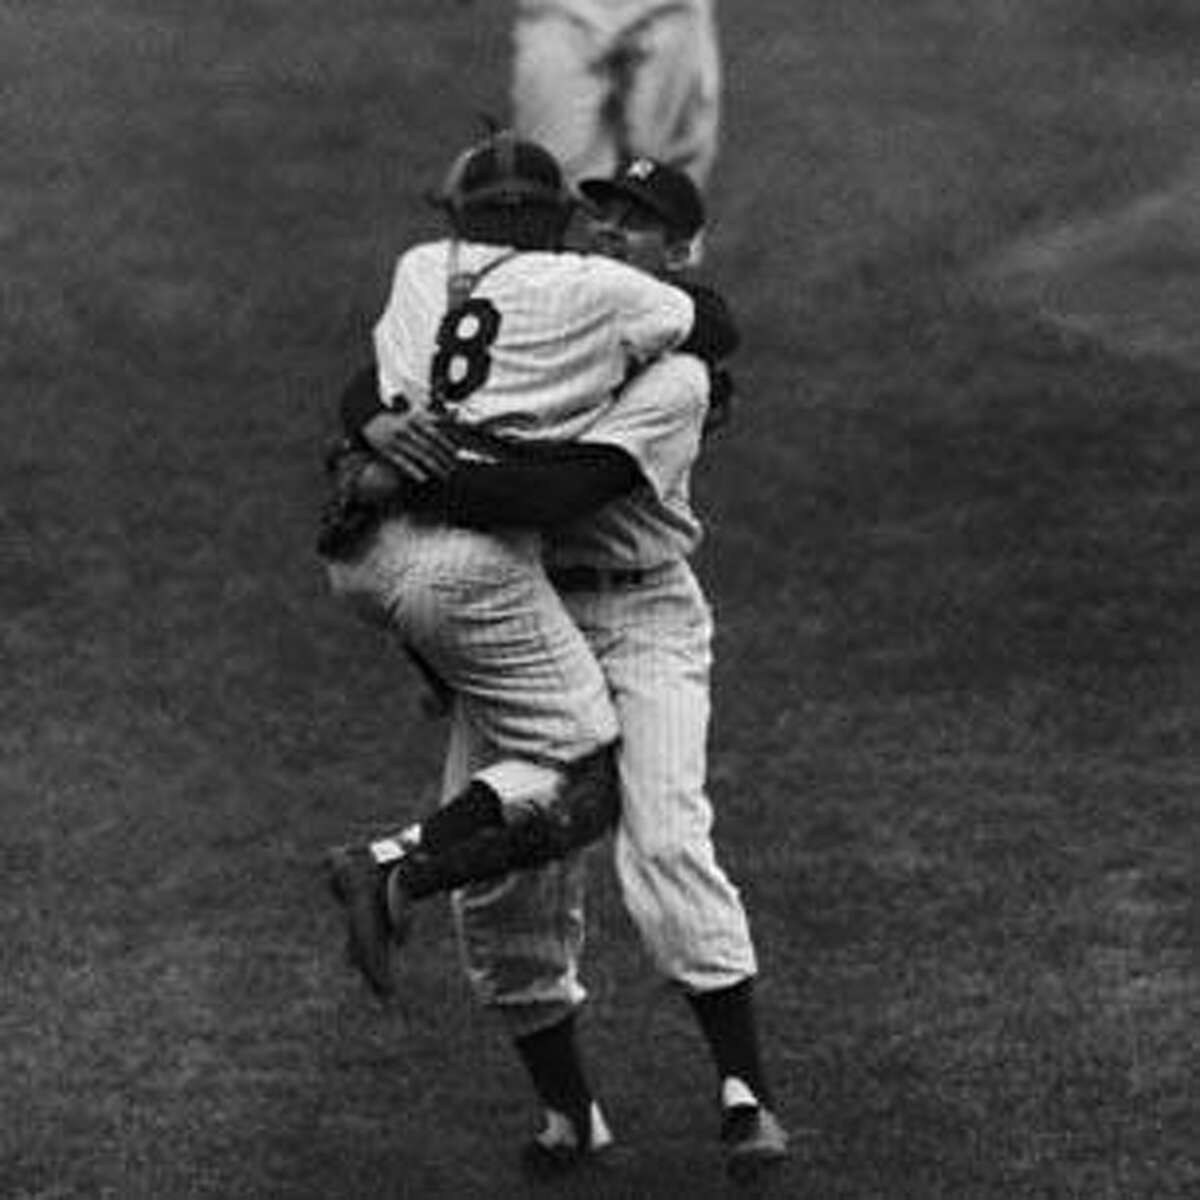 Don Larsen's World Series perfect game was the sports story of the